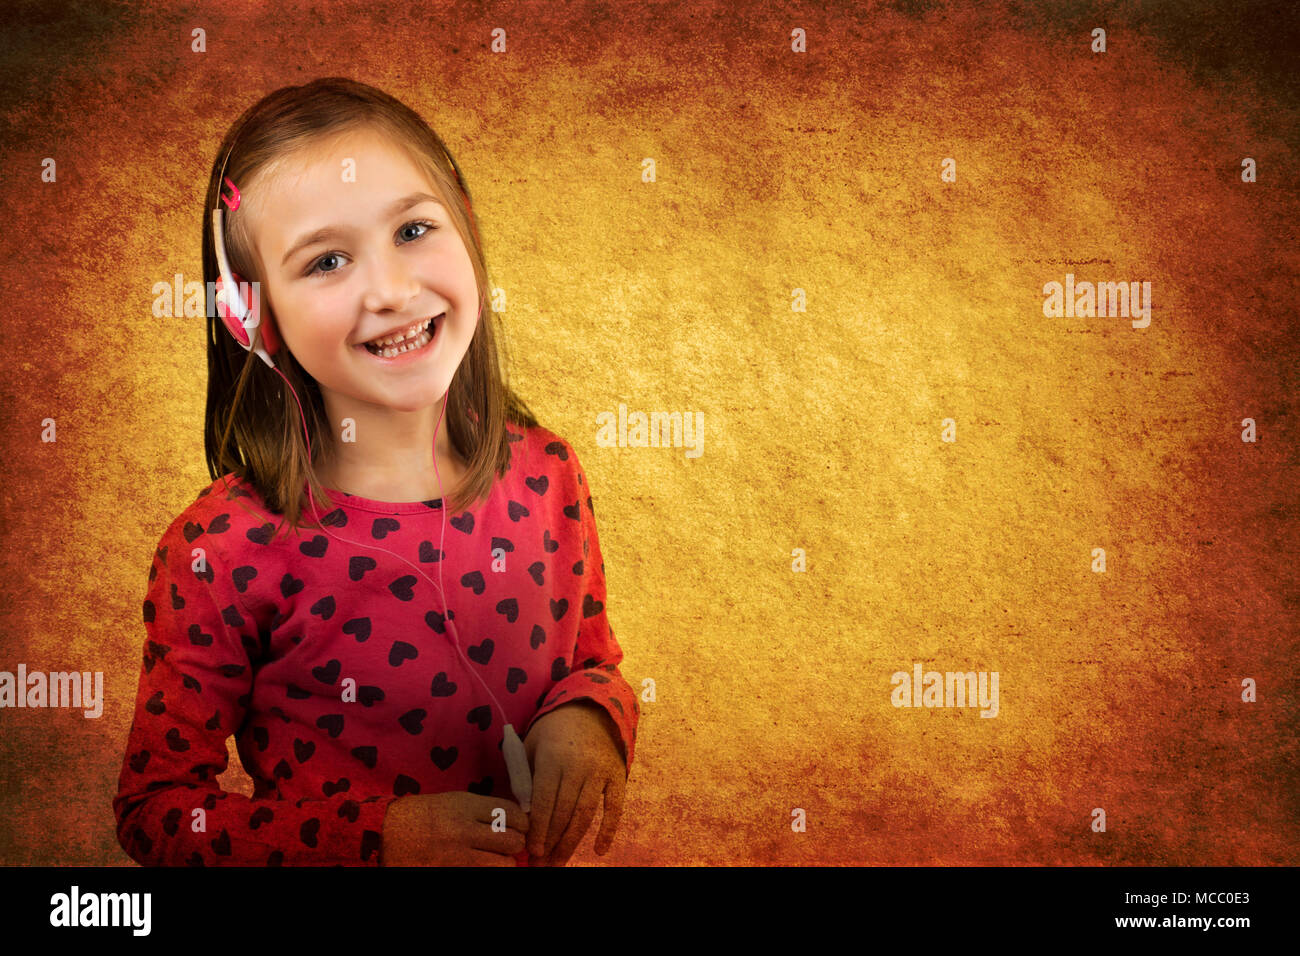 Little happy girl with headphones having fun listening to the music. Vintage grunge paper background. Stock Photo